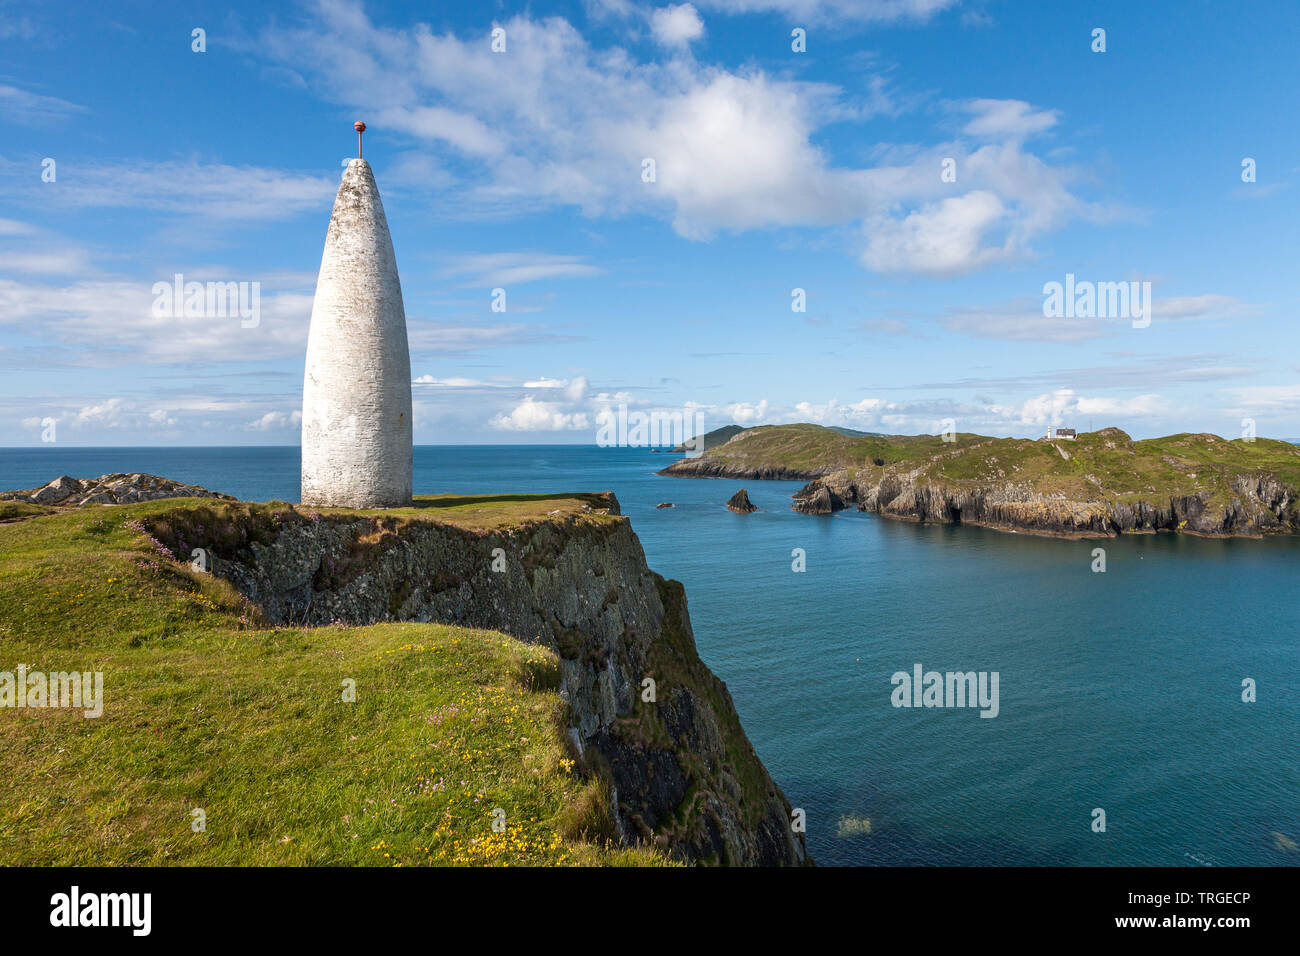 Baltimore, Cork, Ireland. 05th June, 2019. A bright sunny morning over the signal tower that overlooks Sherkin Island and the entrance to Baltimore Harbour in West Cork, Ireland. Stock Photo